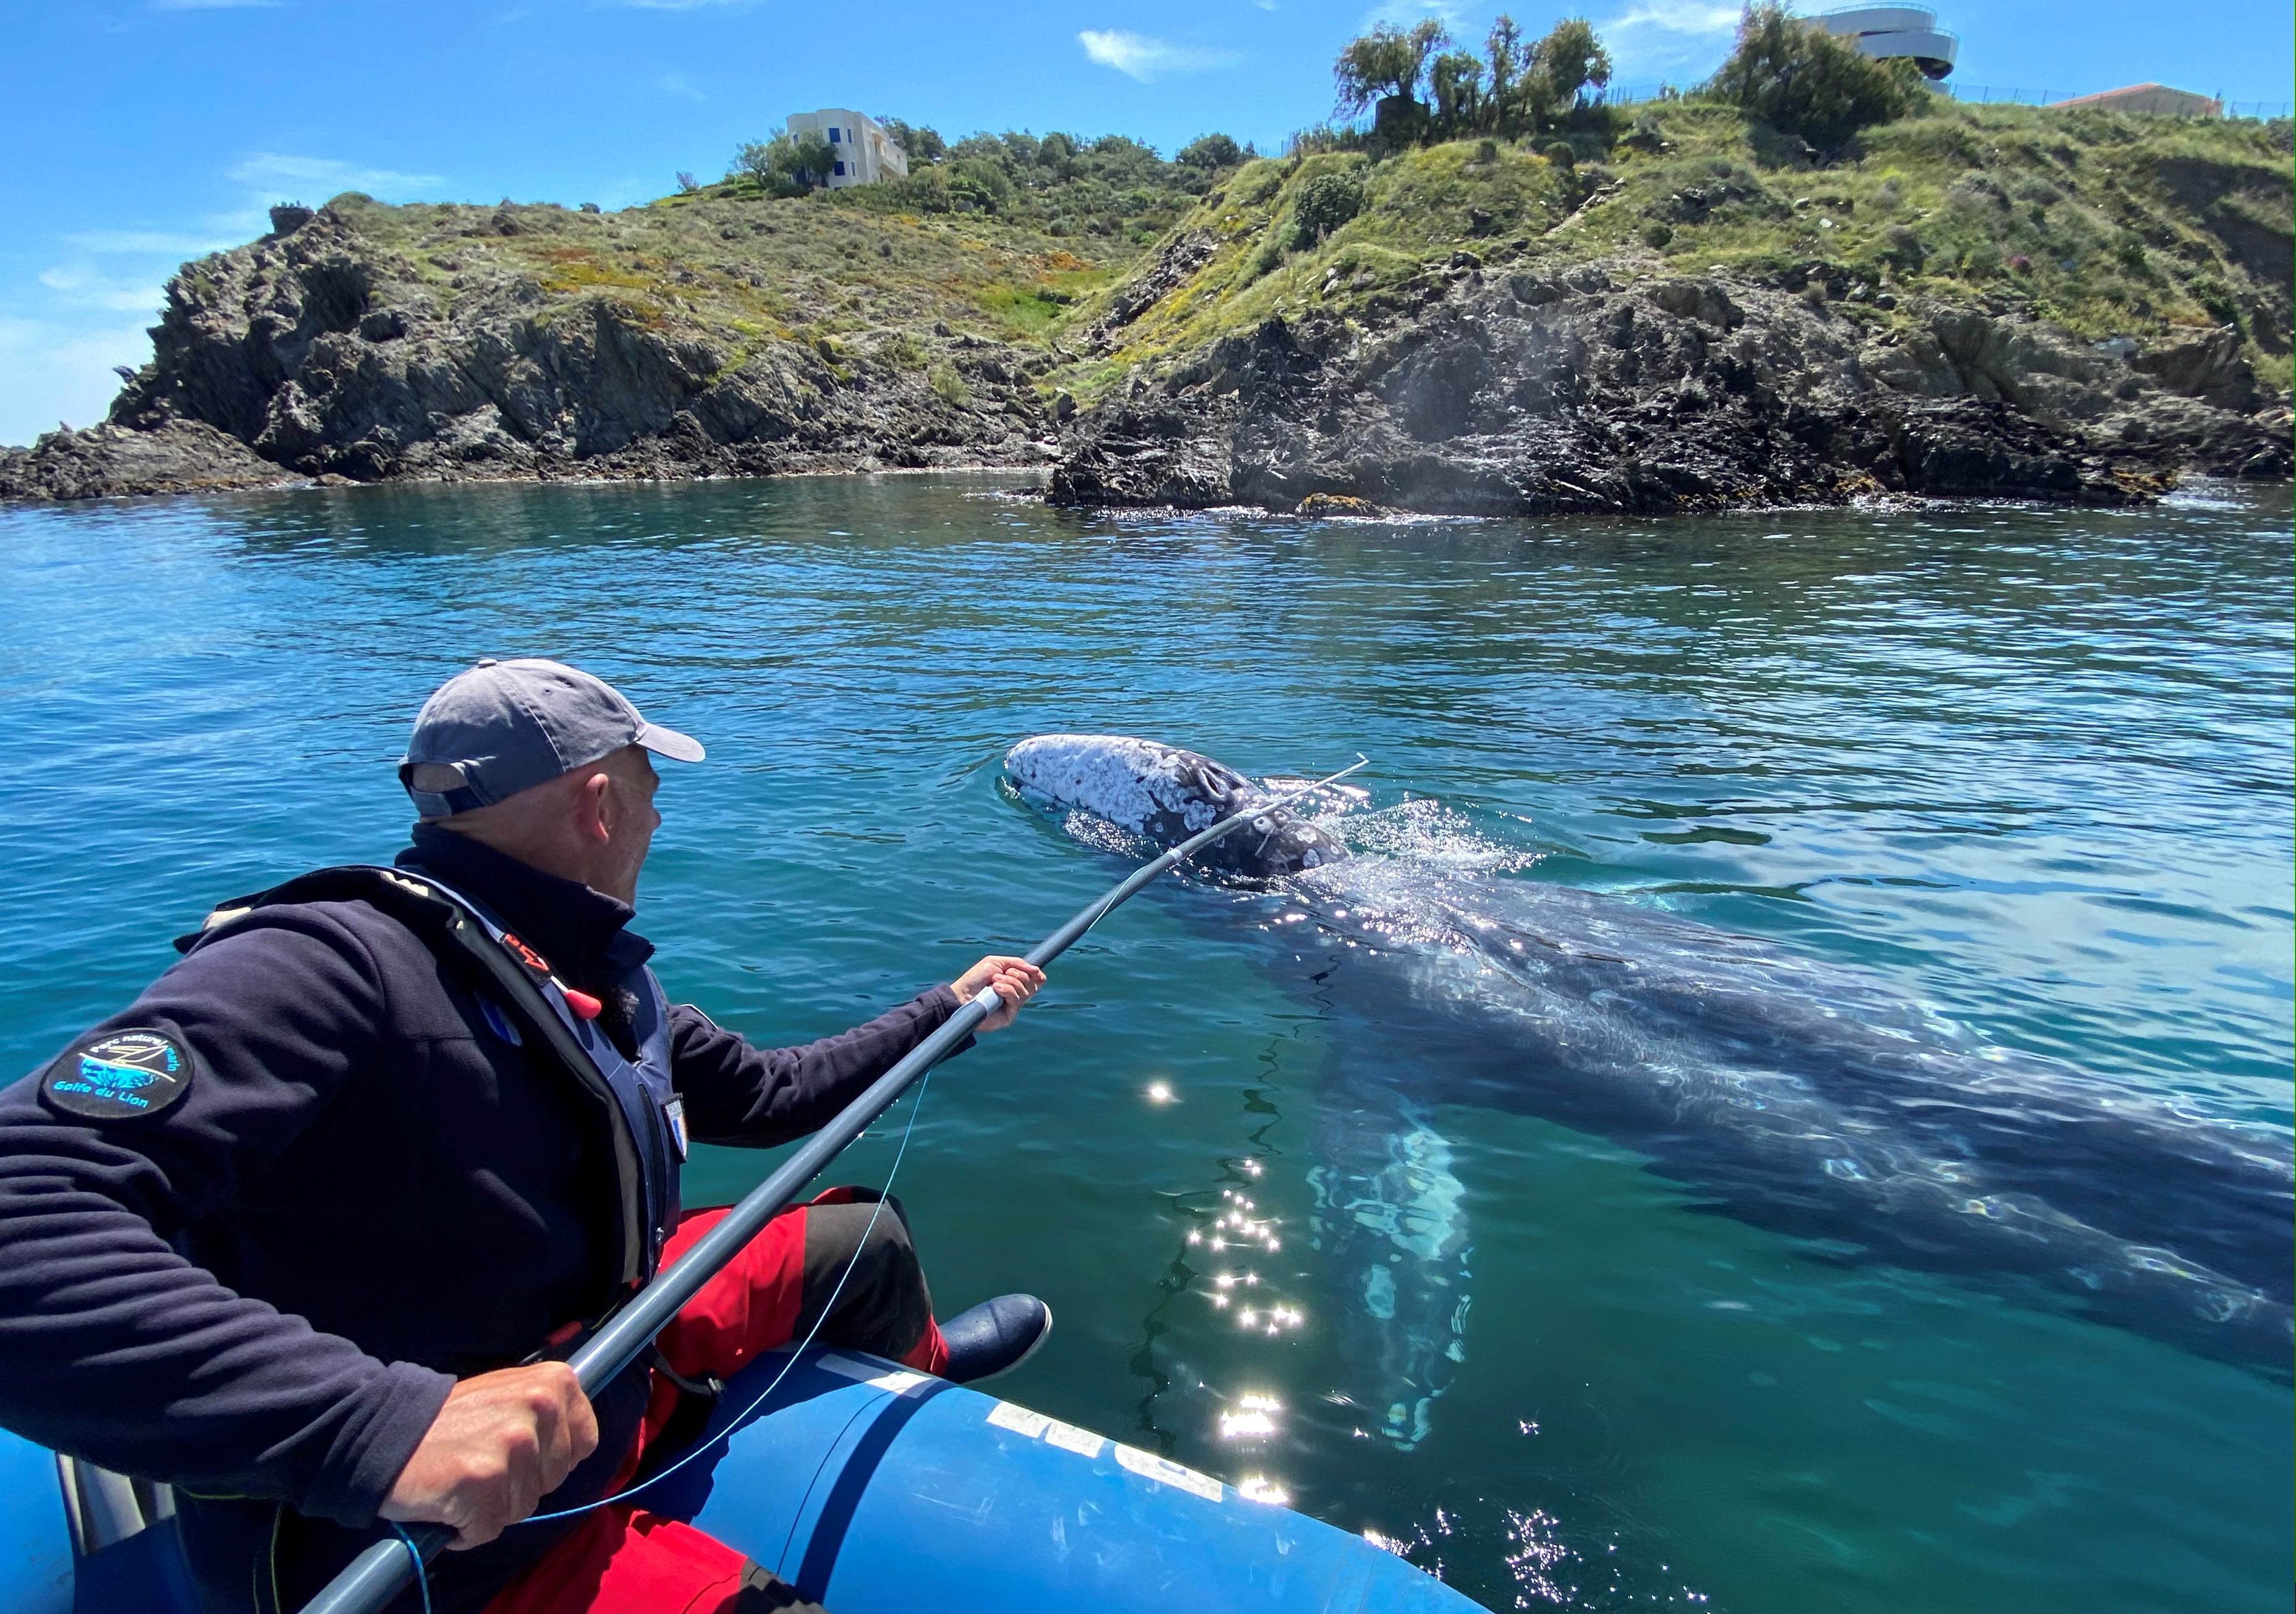 Thierry Auga-Bascou, scientist and member of the French Biodiversity Agency, takes a skin sample of Wally, the 15 month old gray whale, swimming in the Mediterranean Sea past the coast of Argeles-Sur-Mer, France, May 6, 2021. REUTERS/Alexandre Minguez 